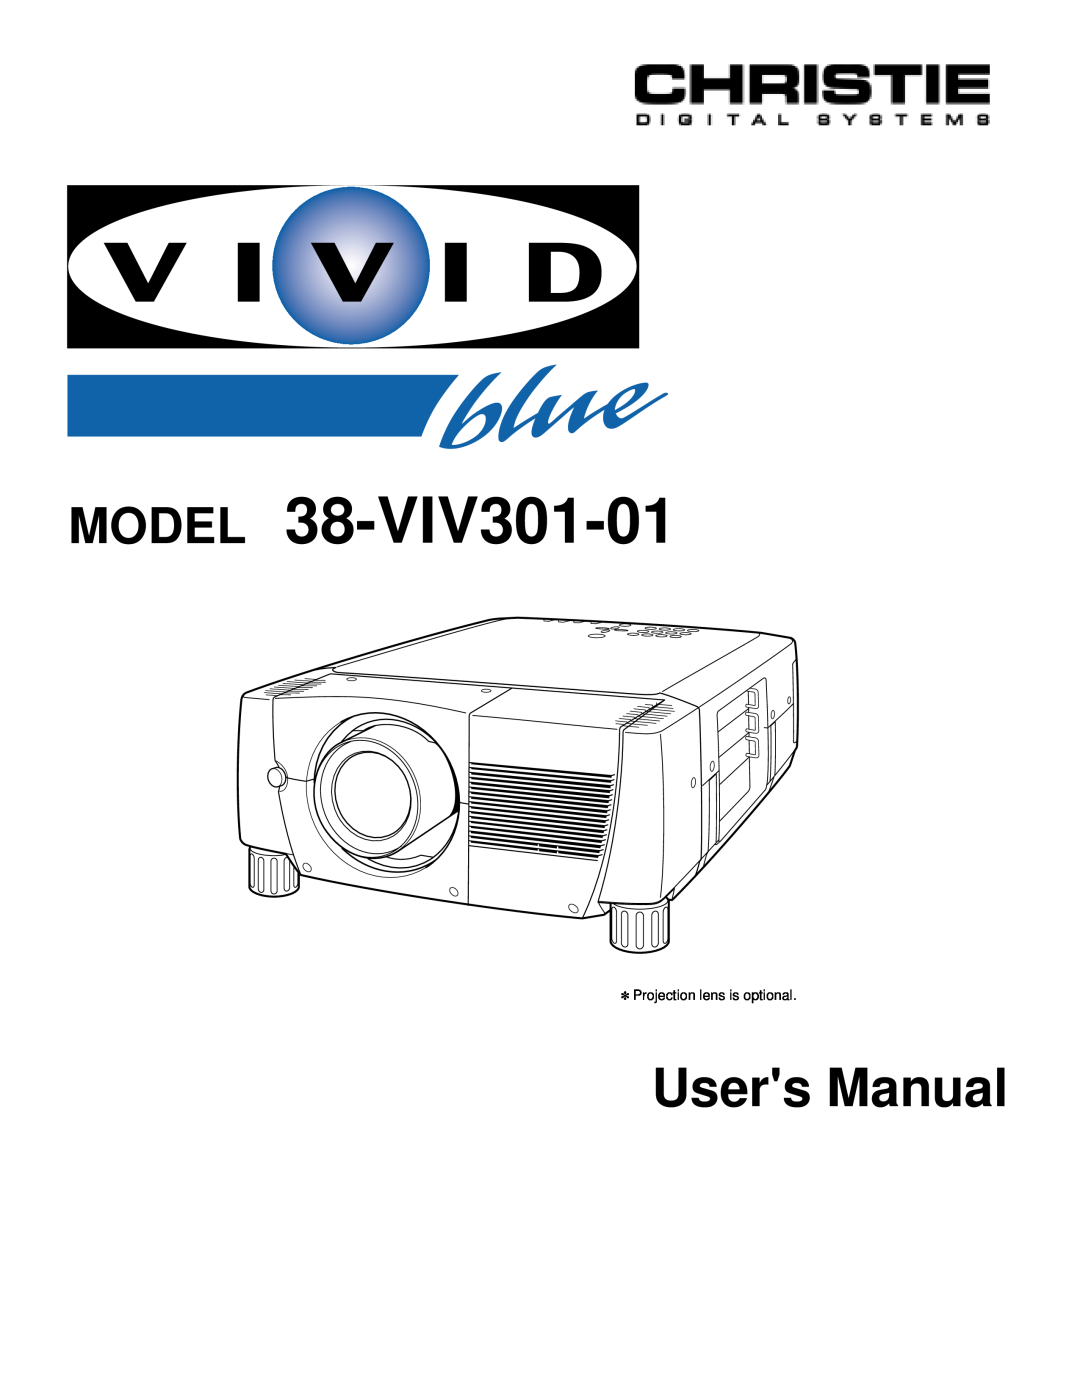 Christie Digital Systems 38-VIV301-01 user manual Model, Users Manual, Projection lens is optional 